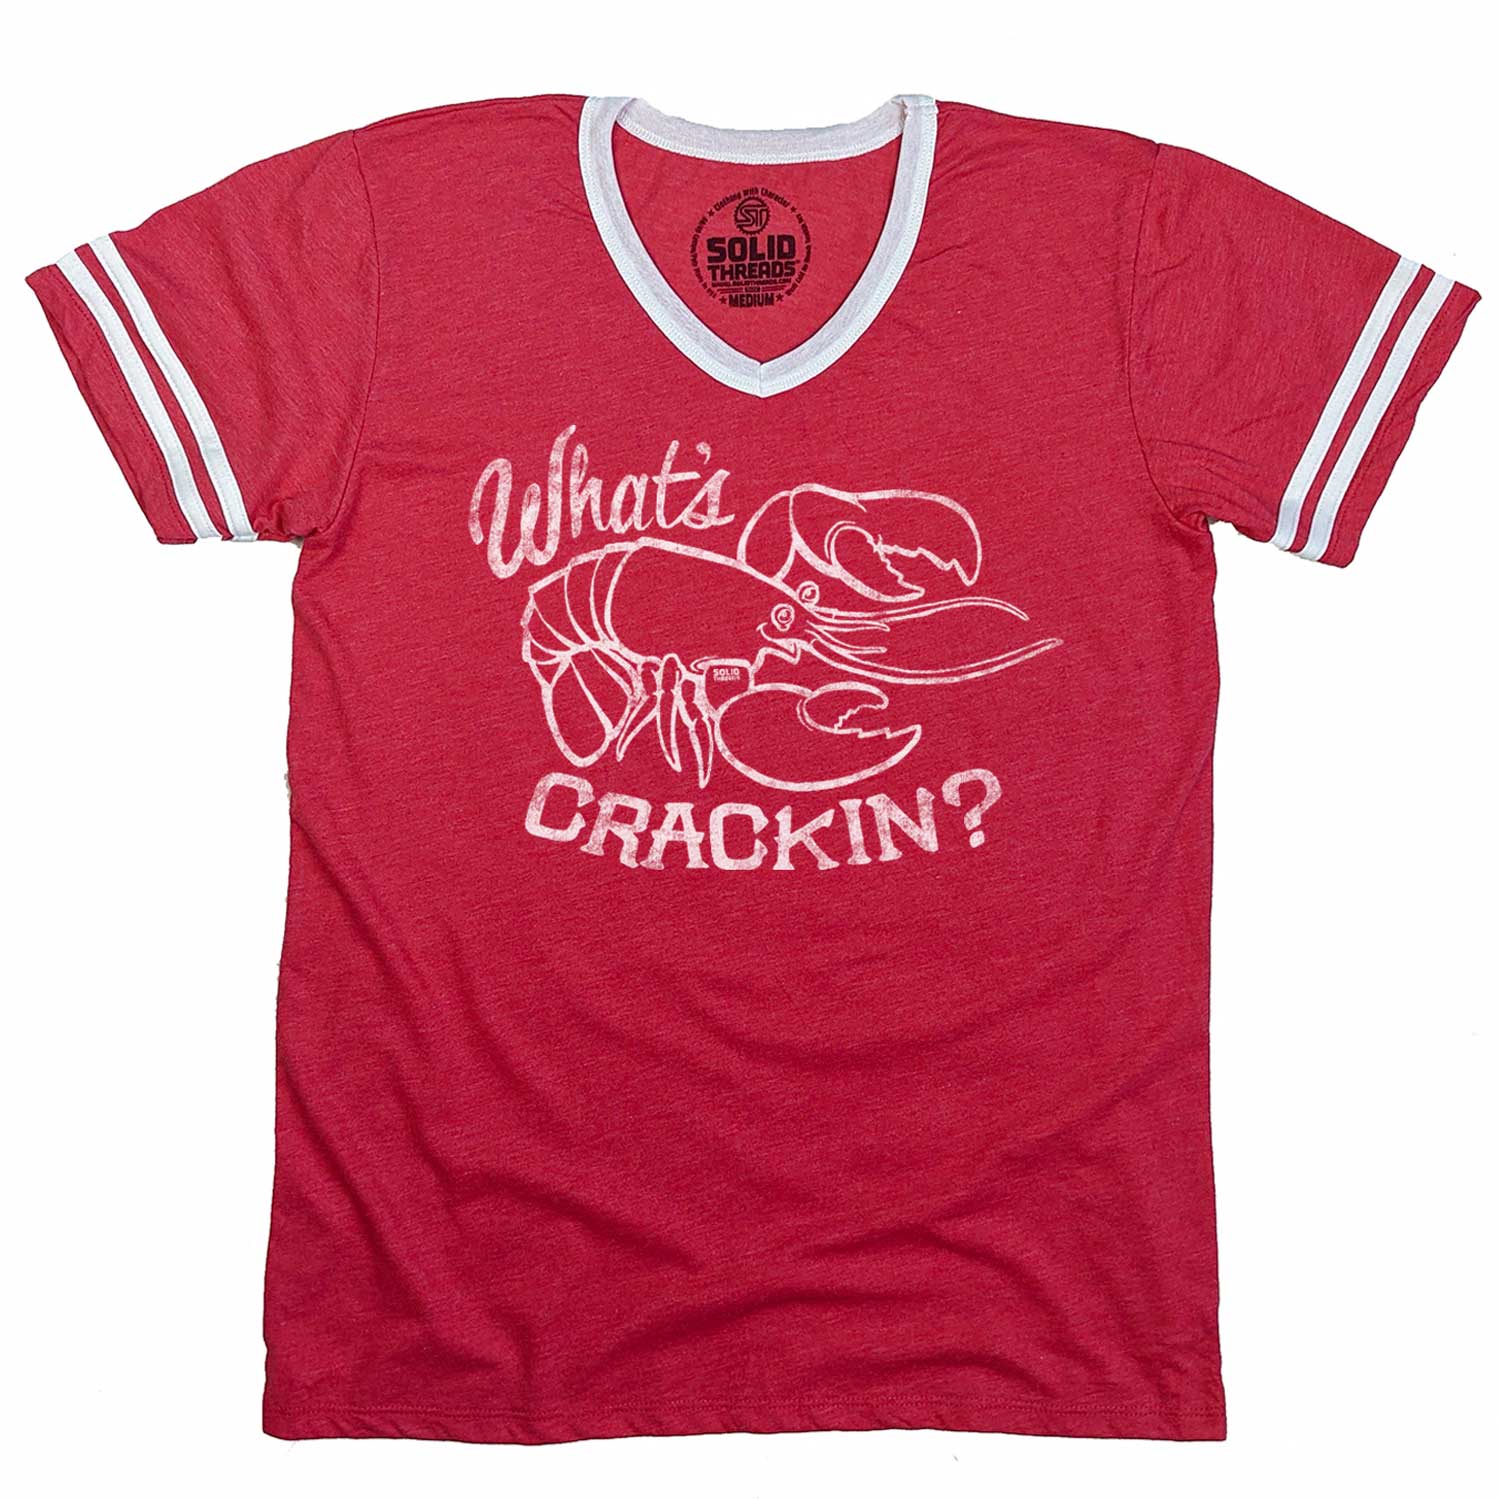 Men's What's Crackin Vintage Graphic V-Neck Tee | Funny Lobster Shirt for Foodie | Solid Threads